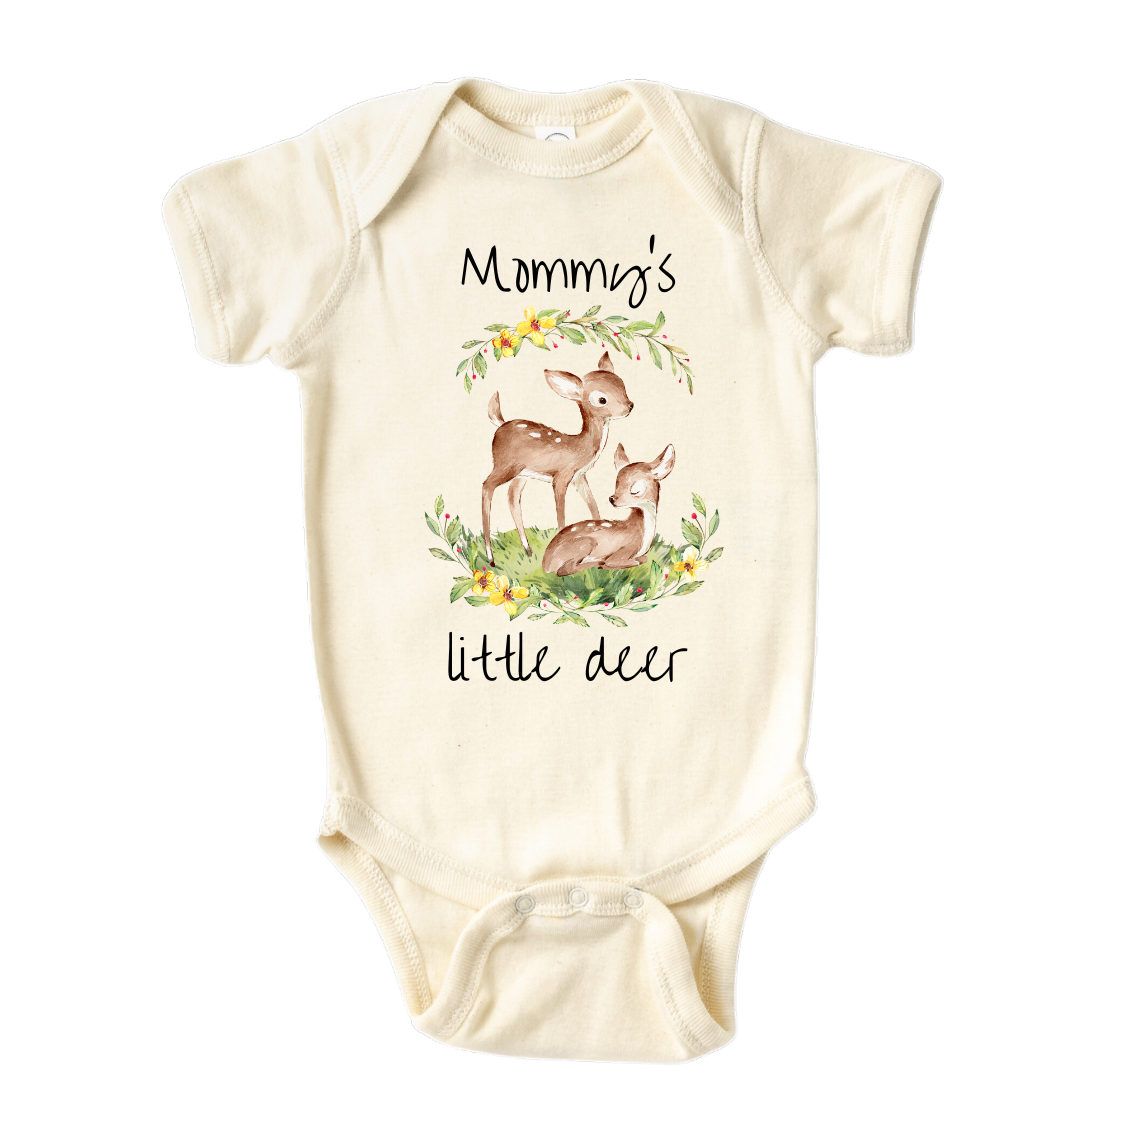 Natural Onesie with a cute printed design of a Parent and Kid Deer, customizable with the text 'Mommy's Little Deer'